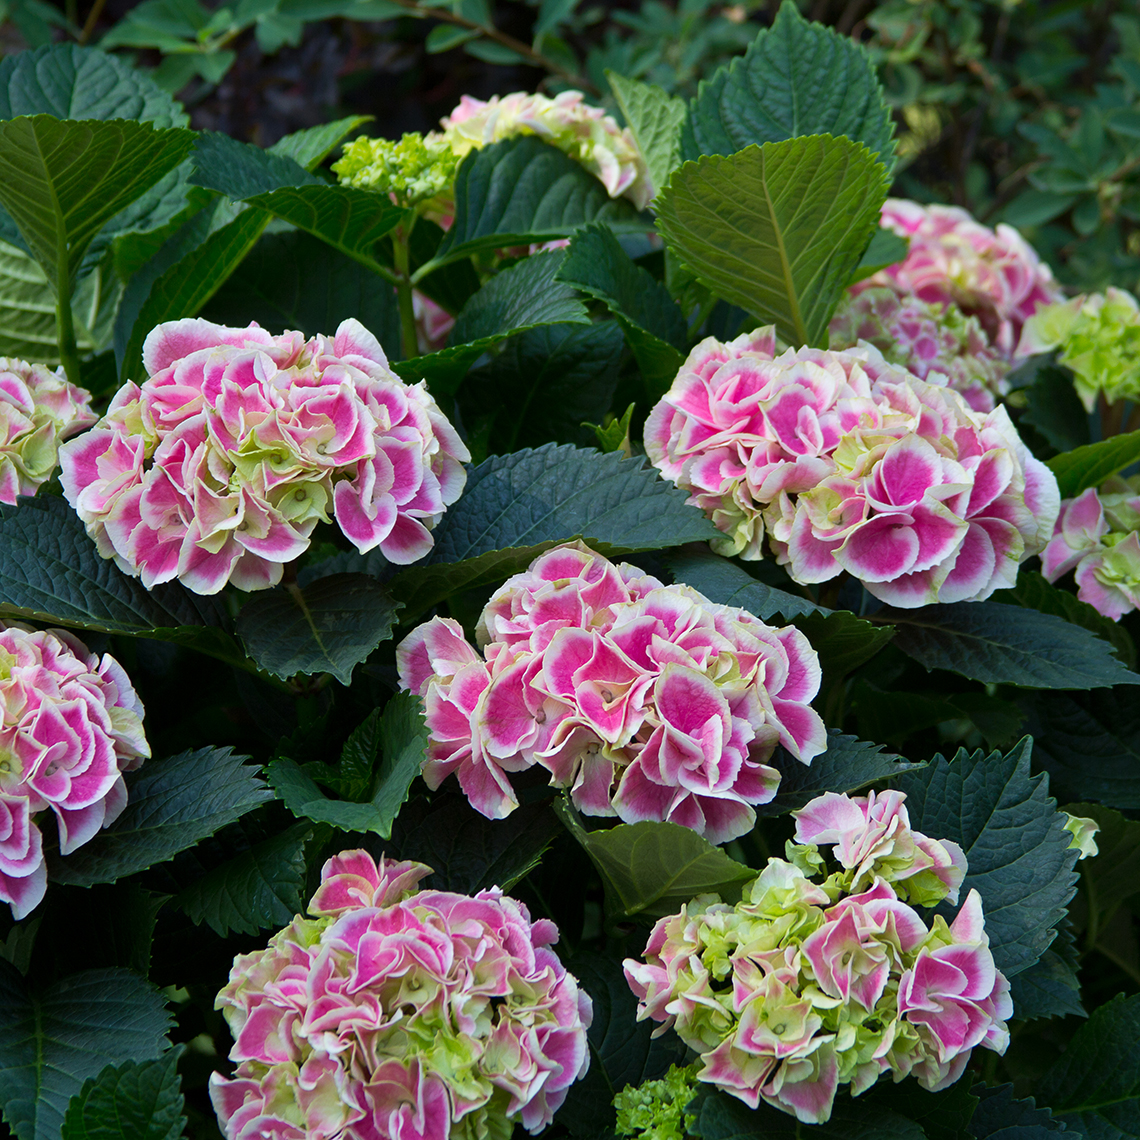 The large mophead pink and white blooms of Edgy Hearts bigleaf hydrangea